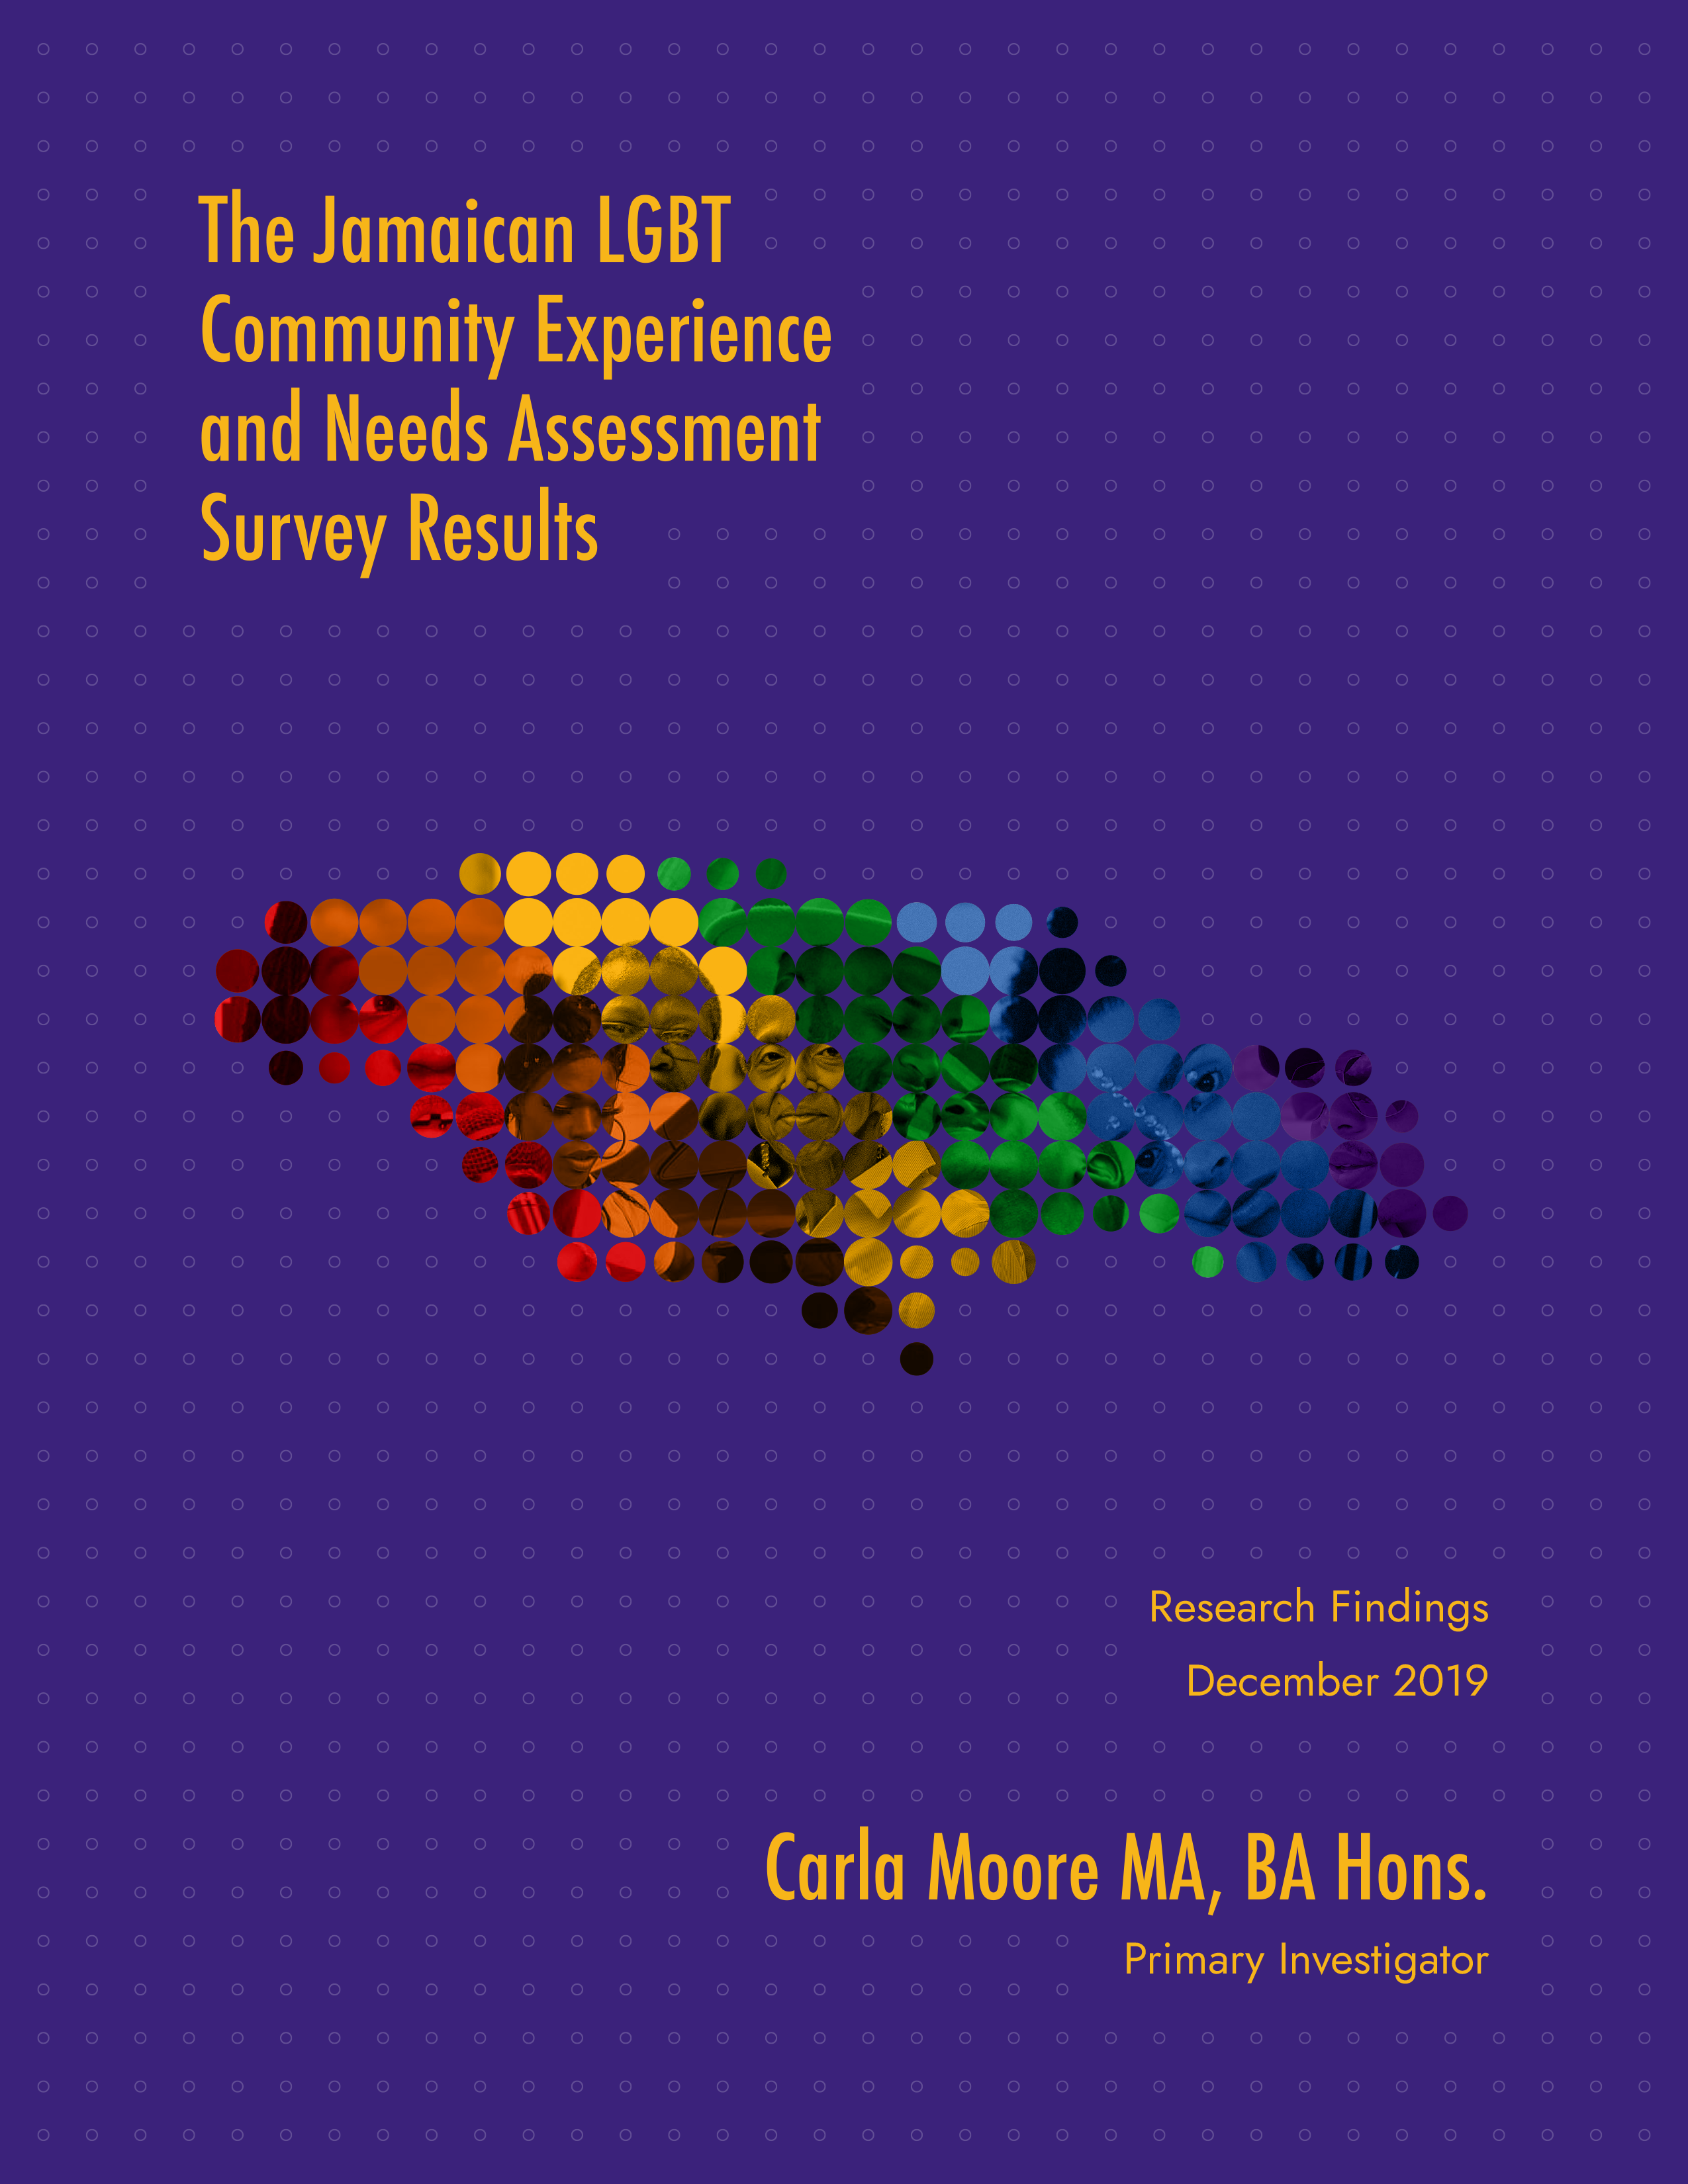 The Jamaican LGBT Community Experience and Needs Assessment Survey Results